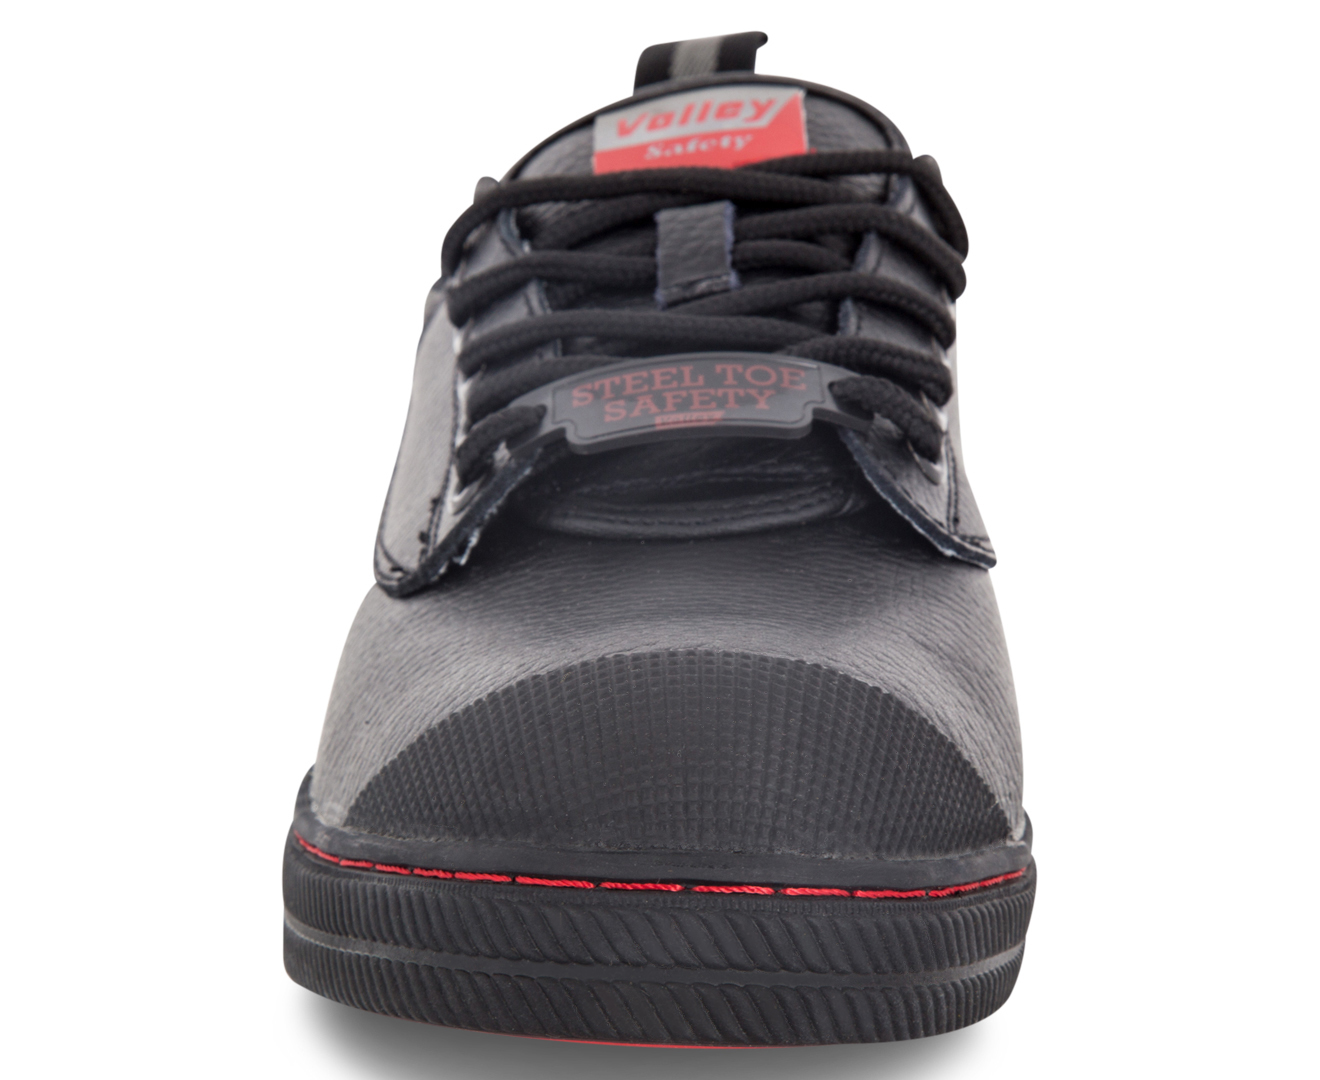 dunlop volley safety shoes